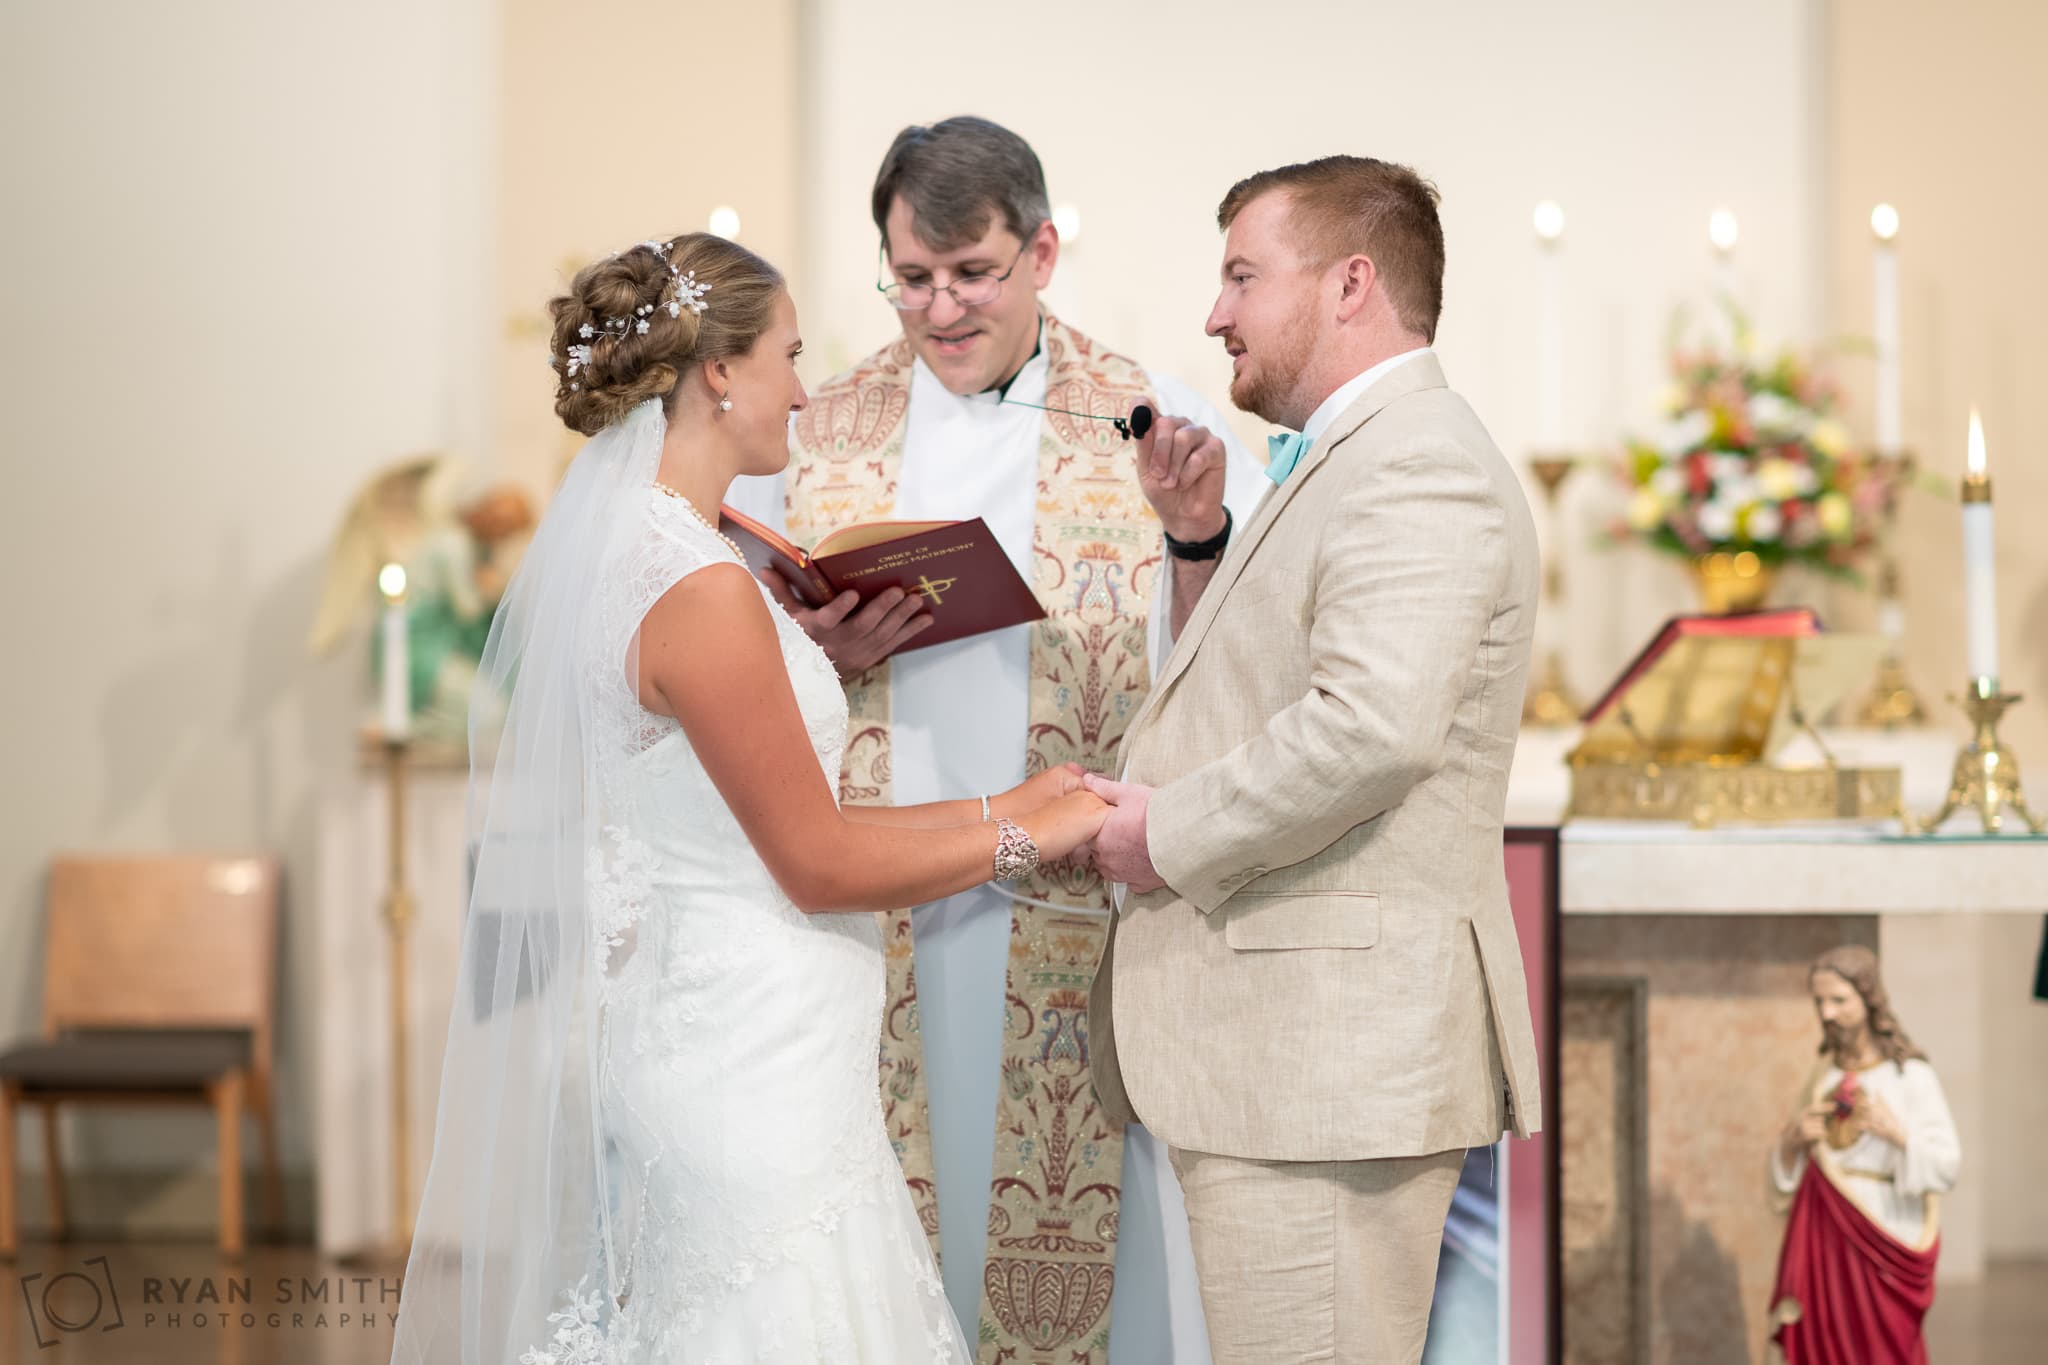 Groom giving vows to the bride - St. Michael's - Garden City, SC